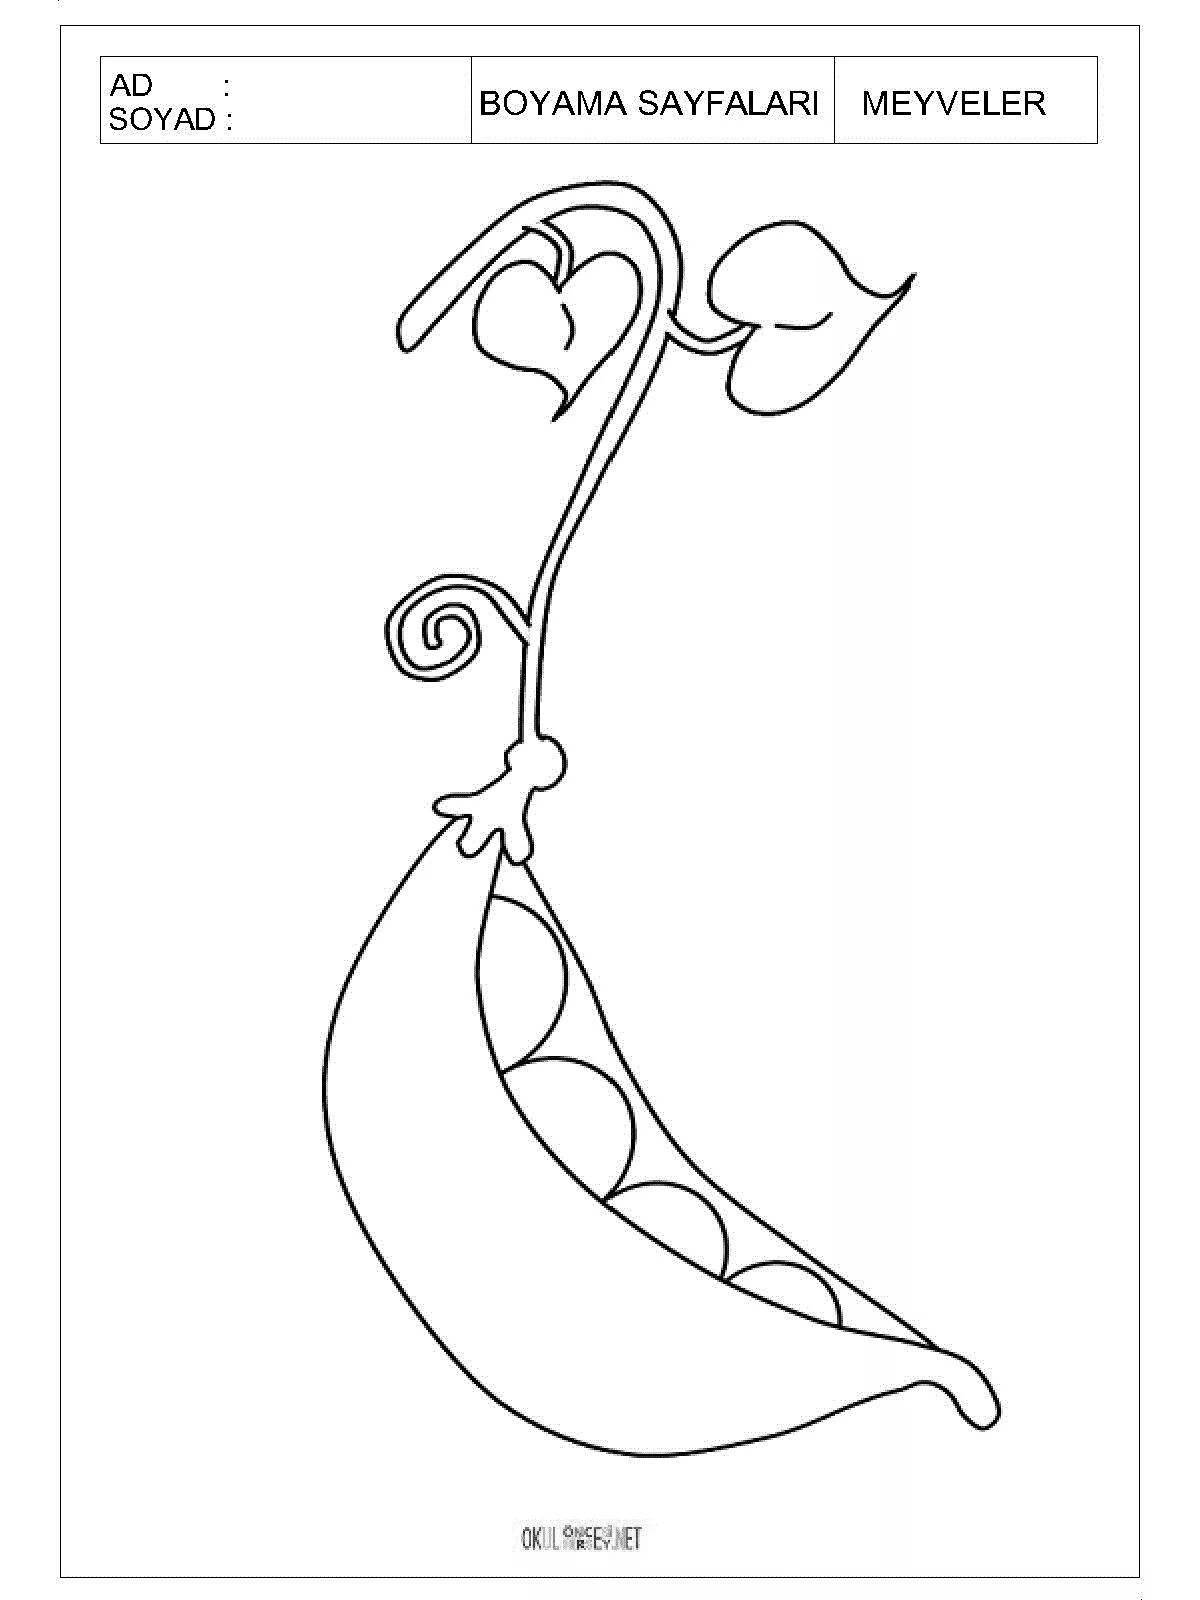 Adorable pea coloring page for students